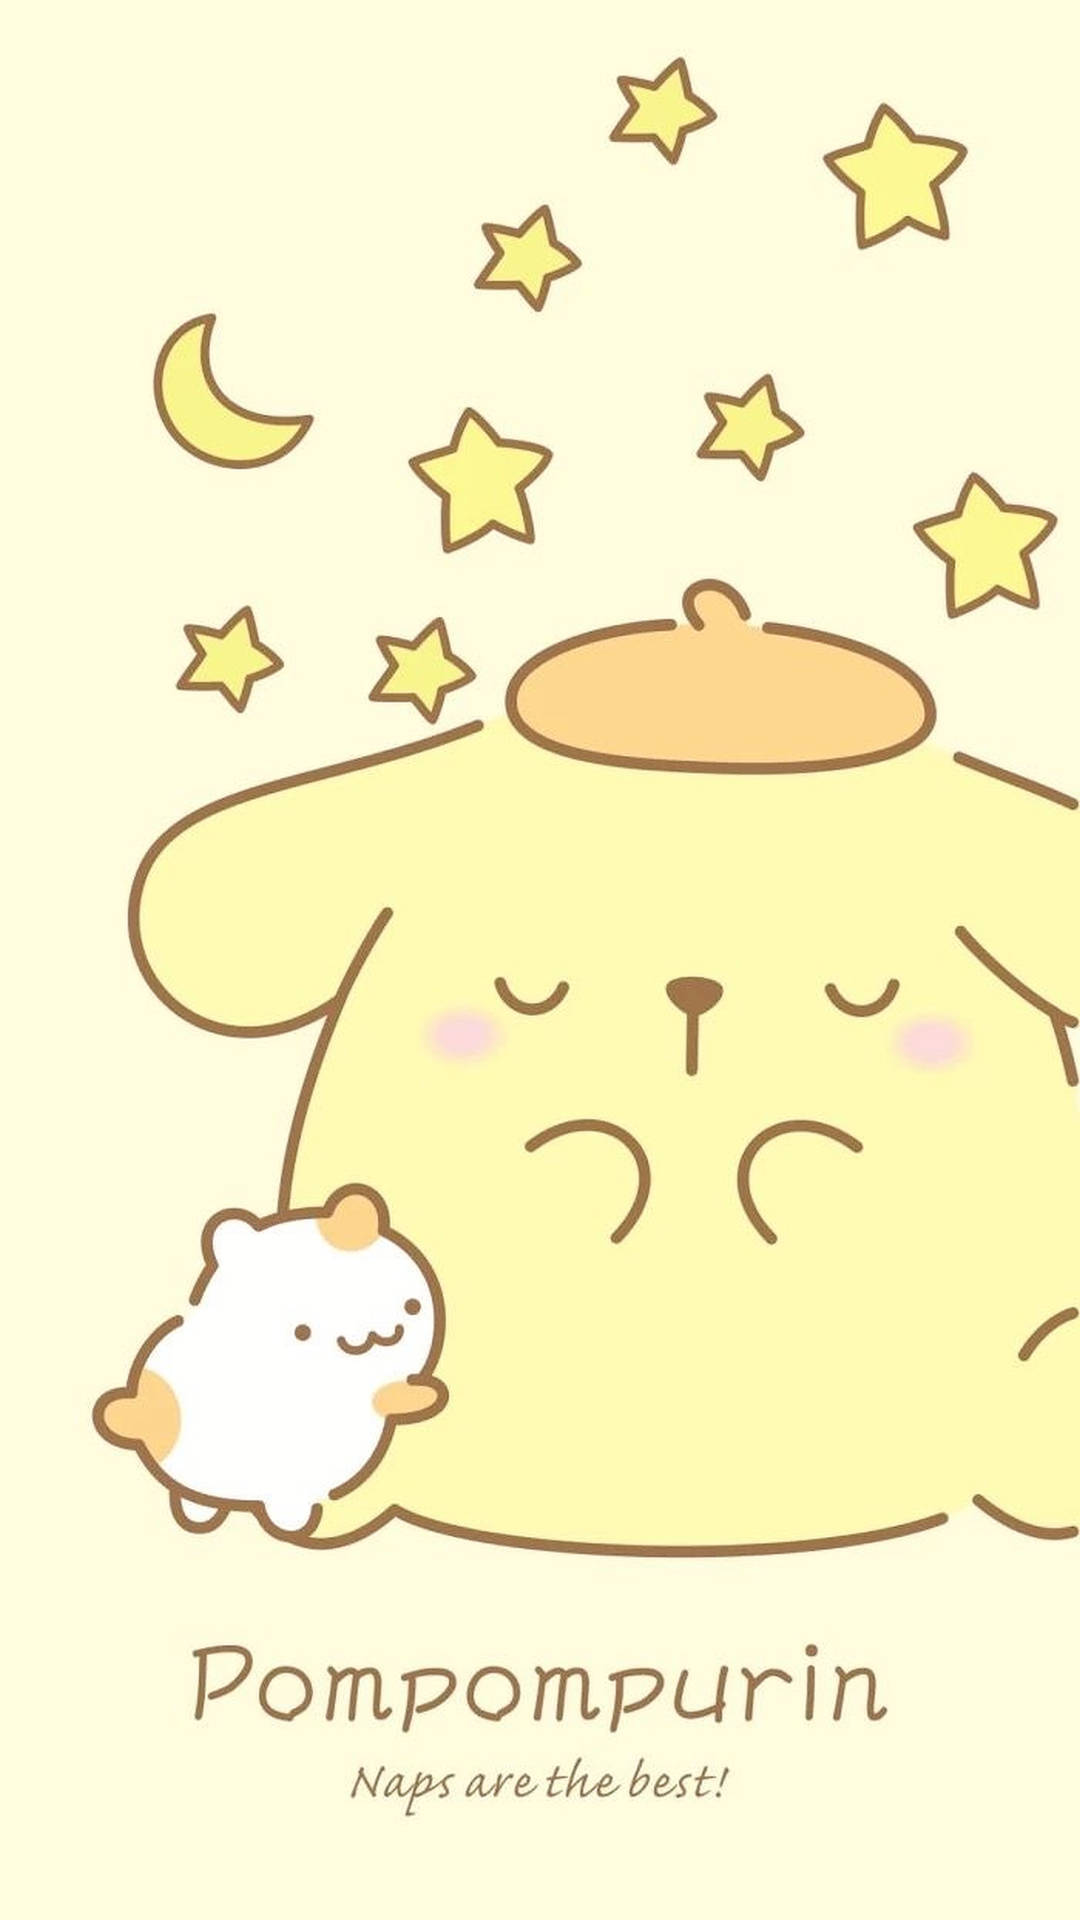 Naps Are The Best Pompompurin